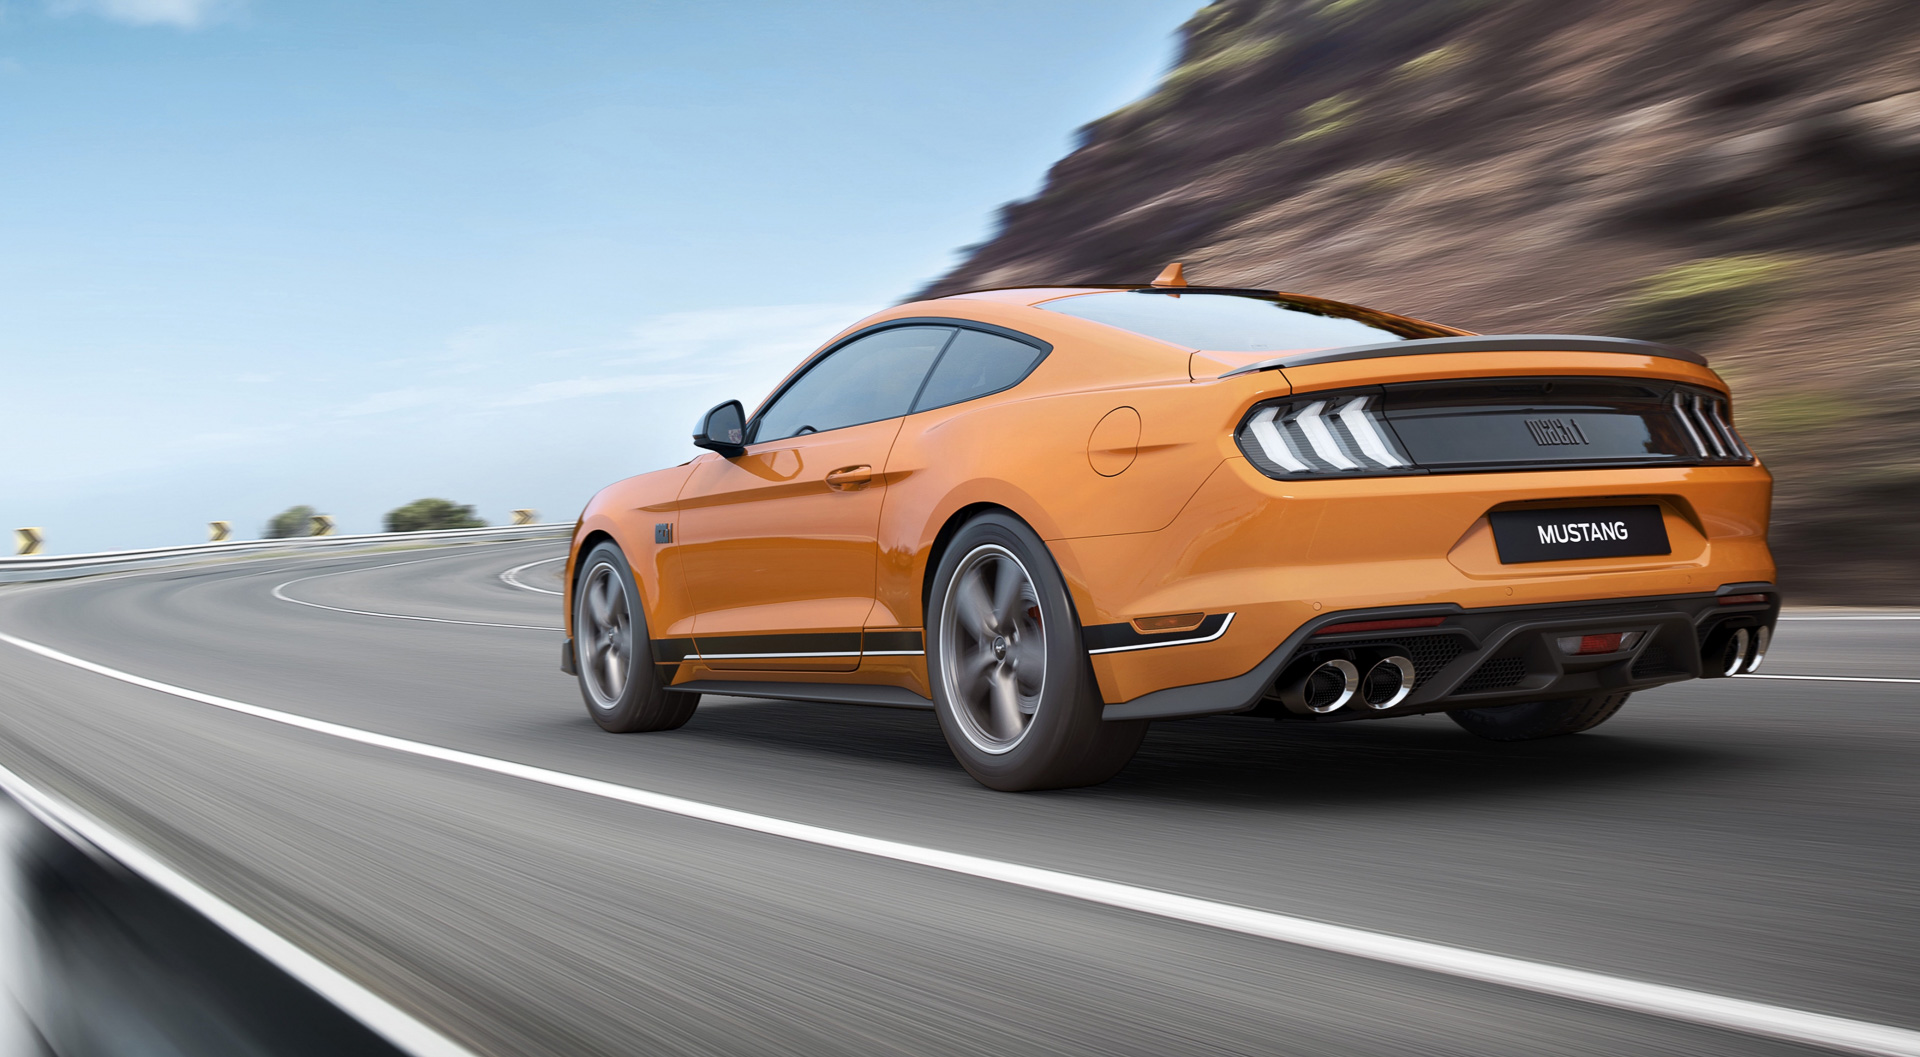 2021 Ford Mustang Mach 1 0-60